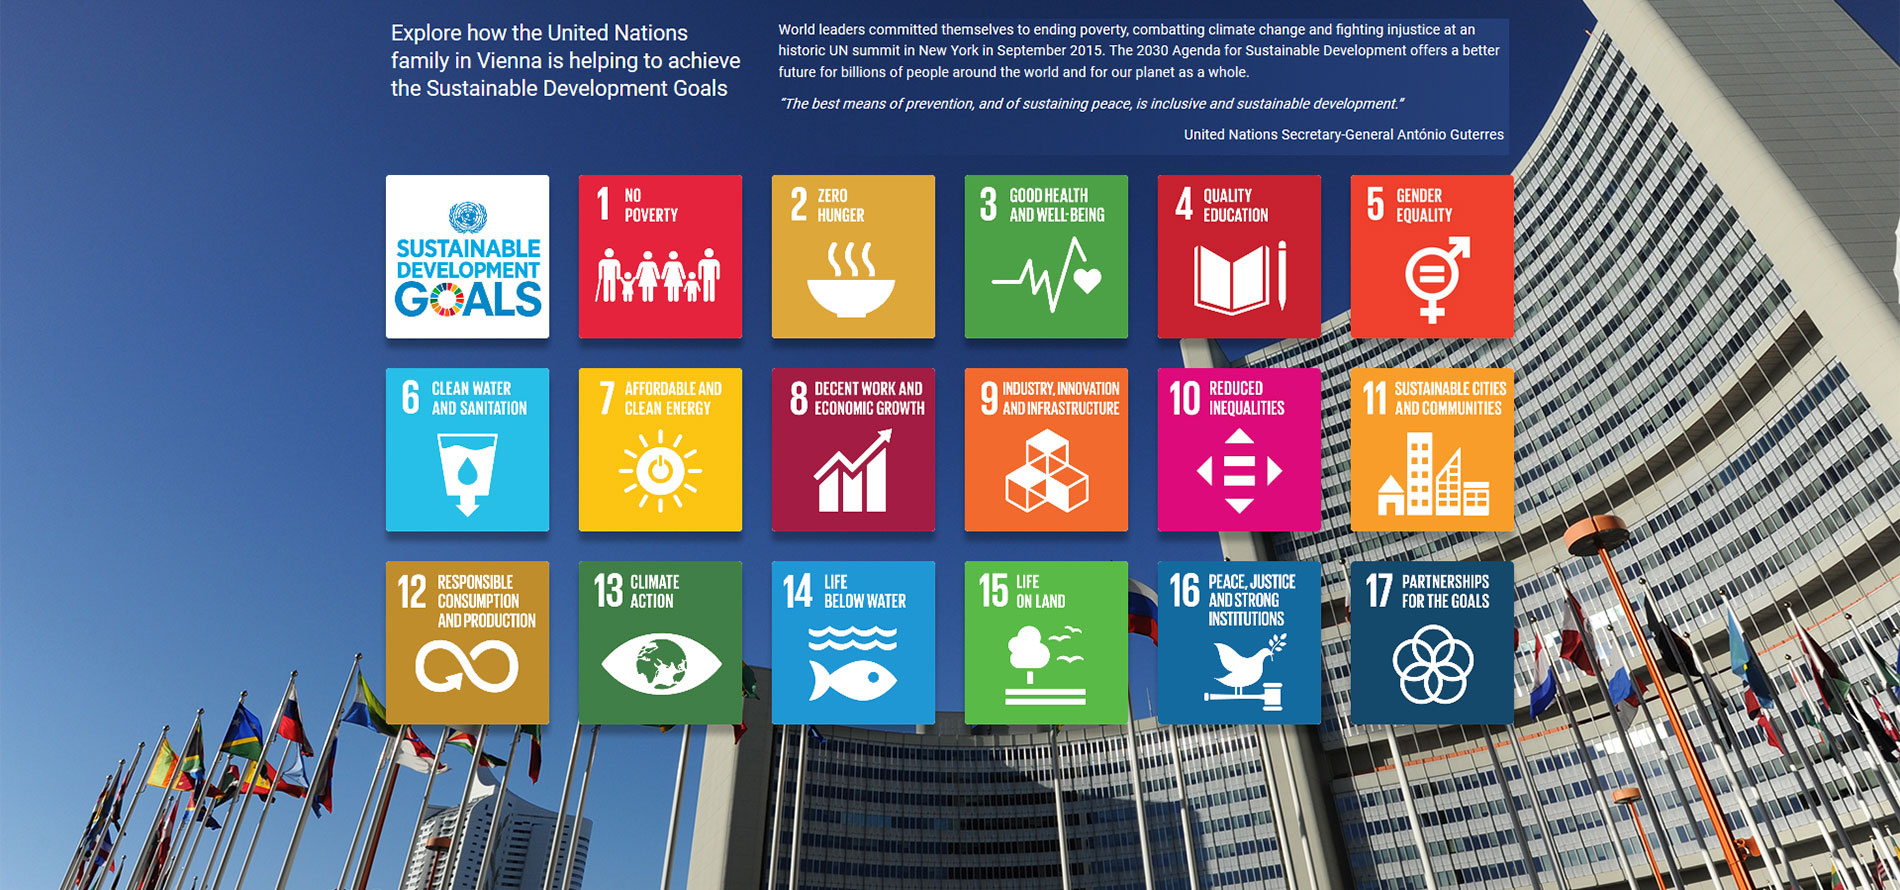 Explore how the United Nations family in Vienna is helping to achieve the Sustainable Development Goals